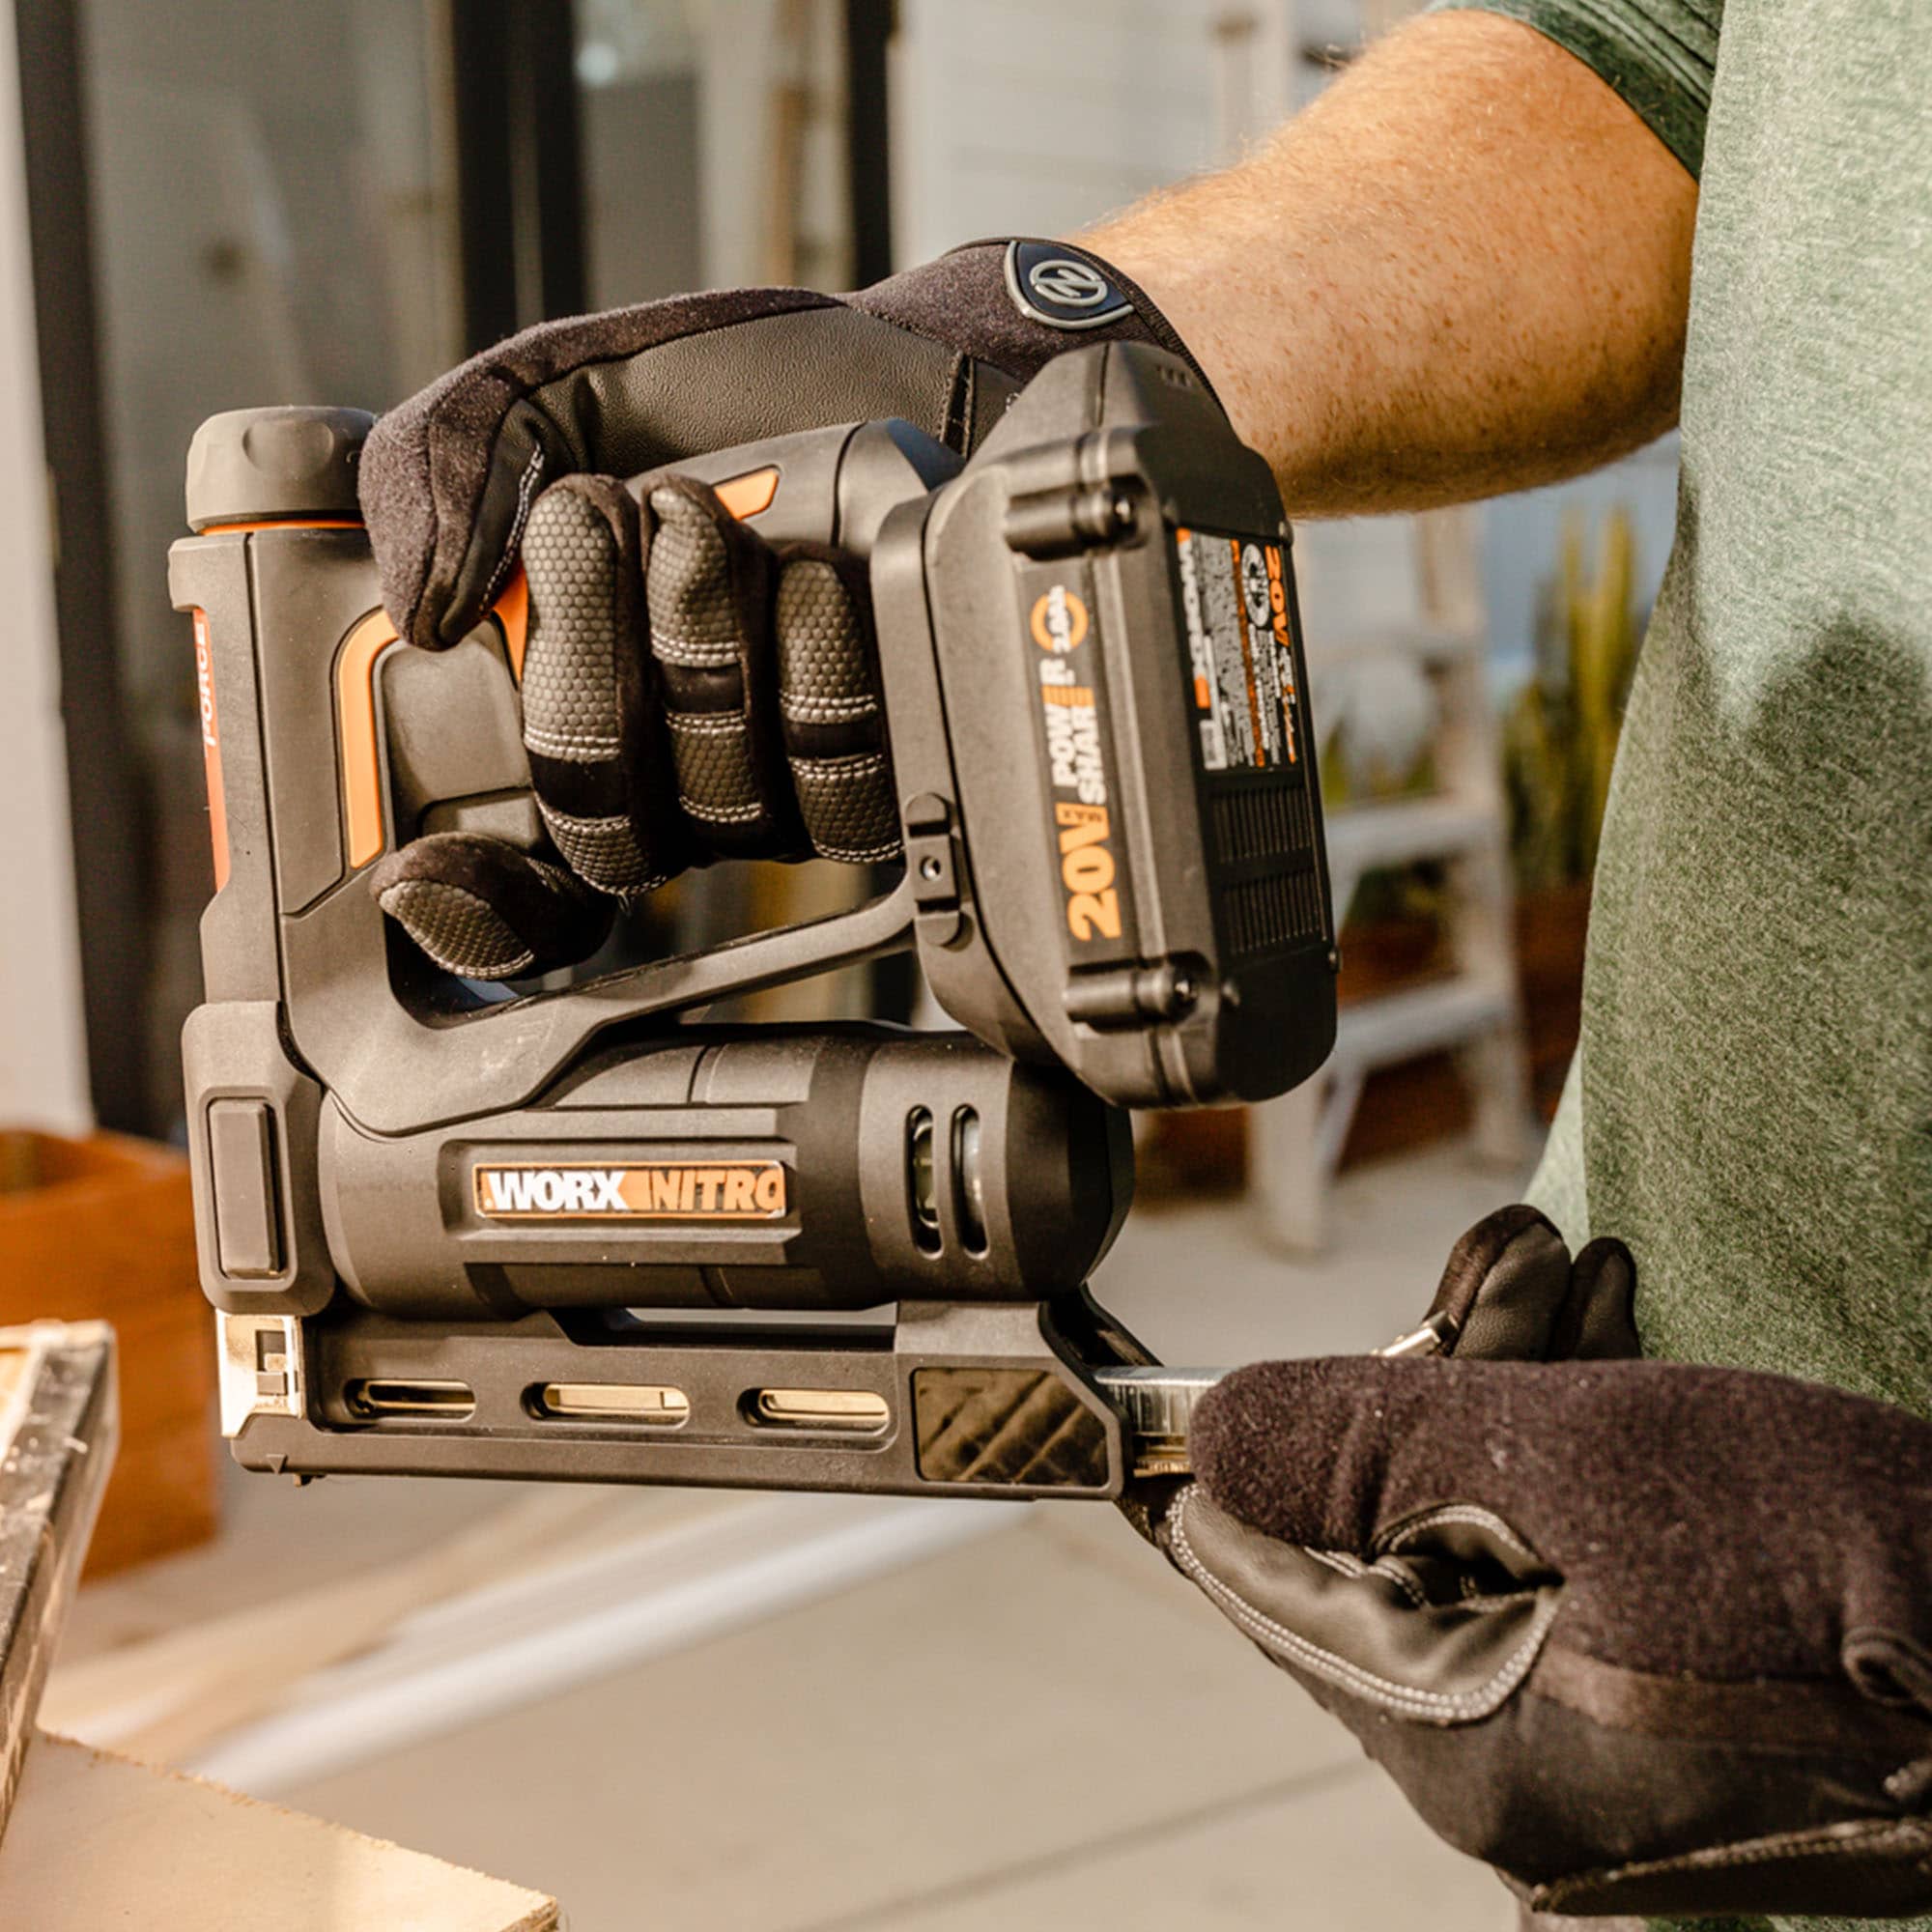 RIDGID 18V Brushless Cordless 18-Gauge 2-1/8 in. Brad Nailer (Tool Only)  with CLEAN DRIVE Technology R09891B - The Home Depot